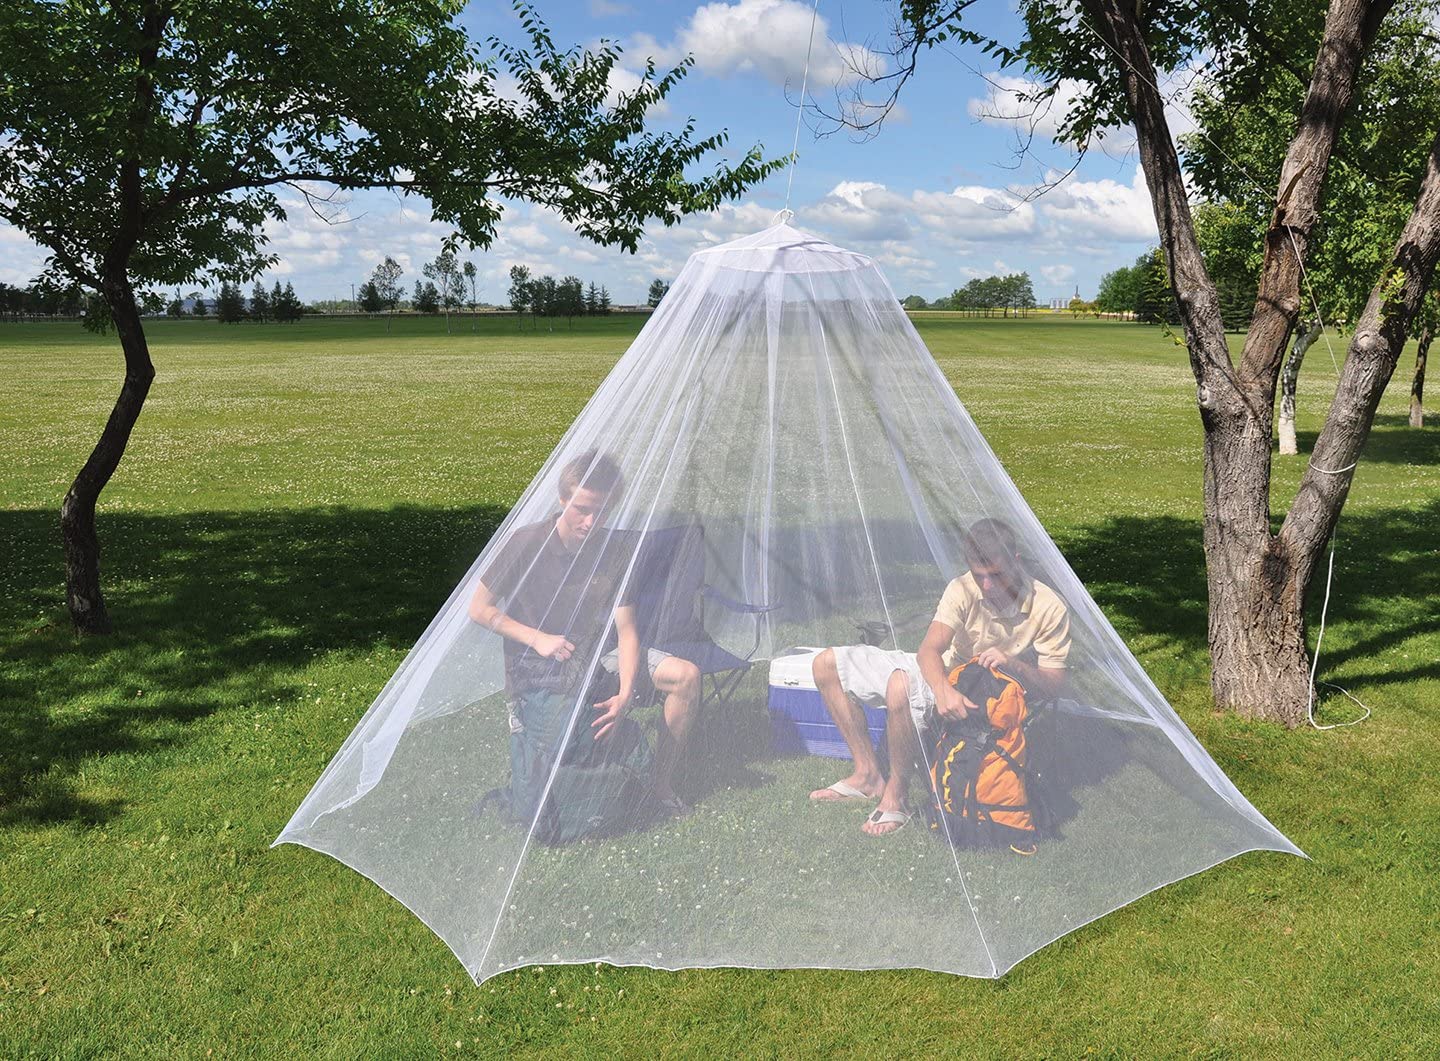 New Large Camping Mosquito Net Indoor Outdoor Insect Tent Netting Storage D7C6